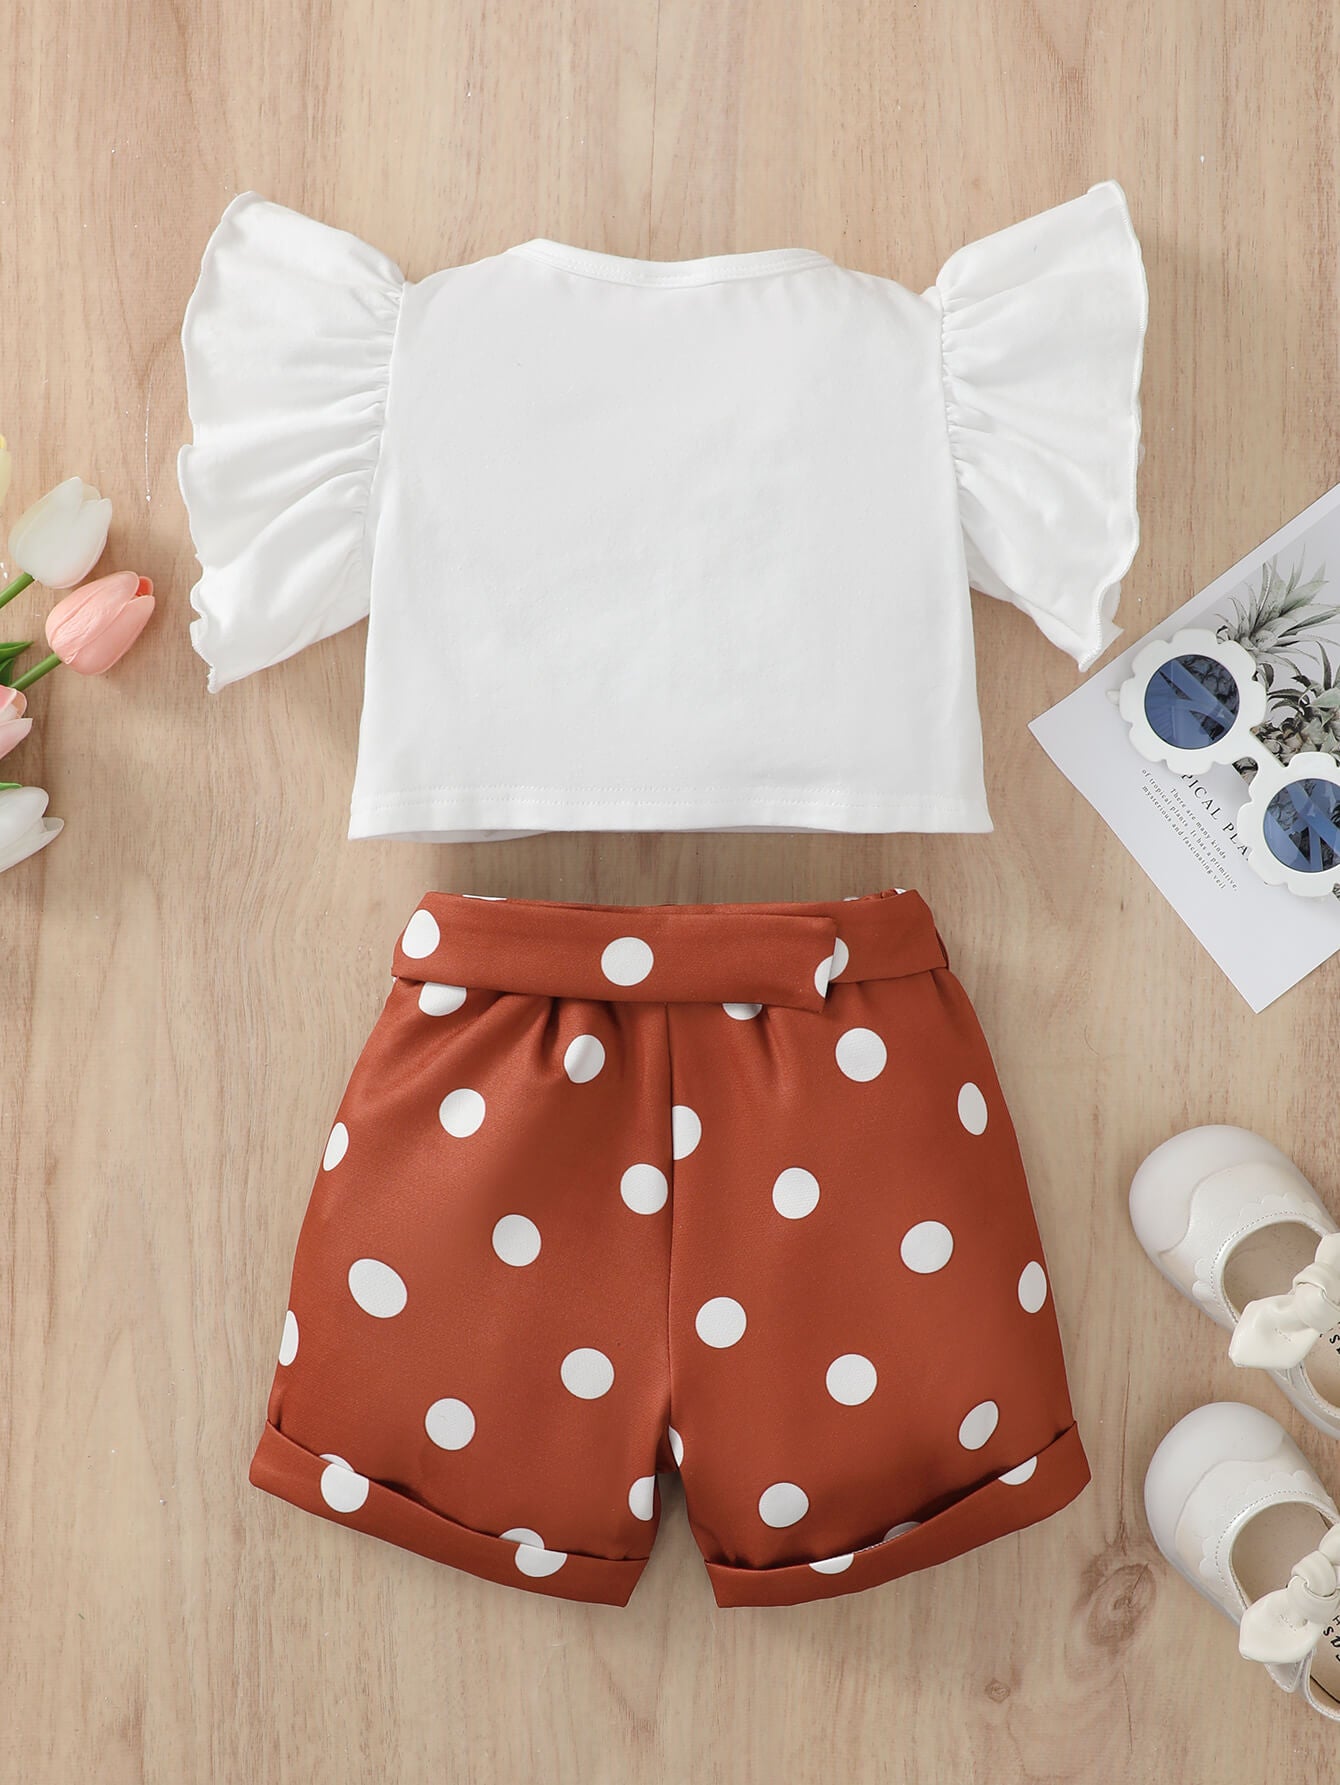 Girls Graphic Butterfly Sleeve Top and Polka Dot Shorts Set, Sizes 12M - 3T